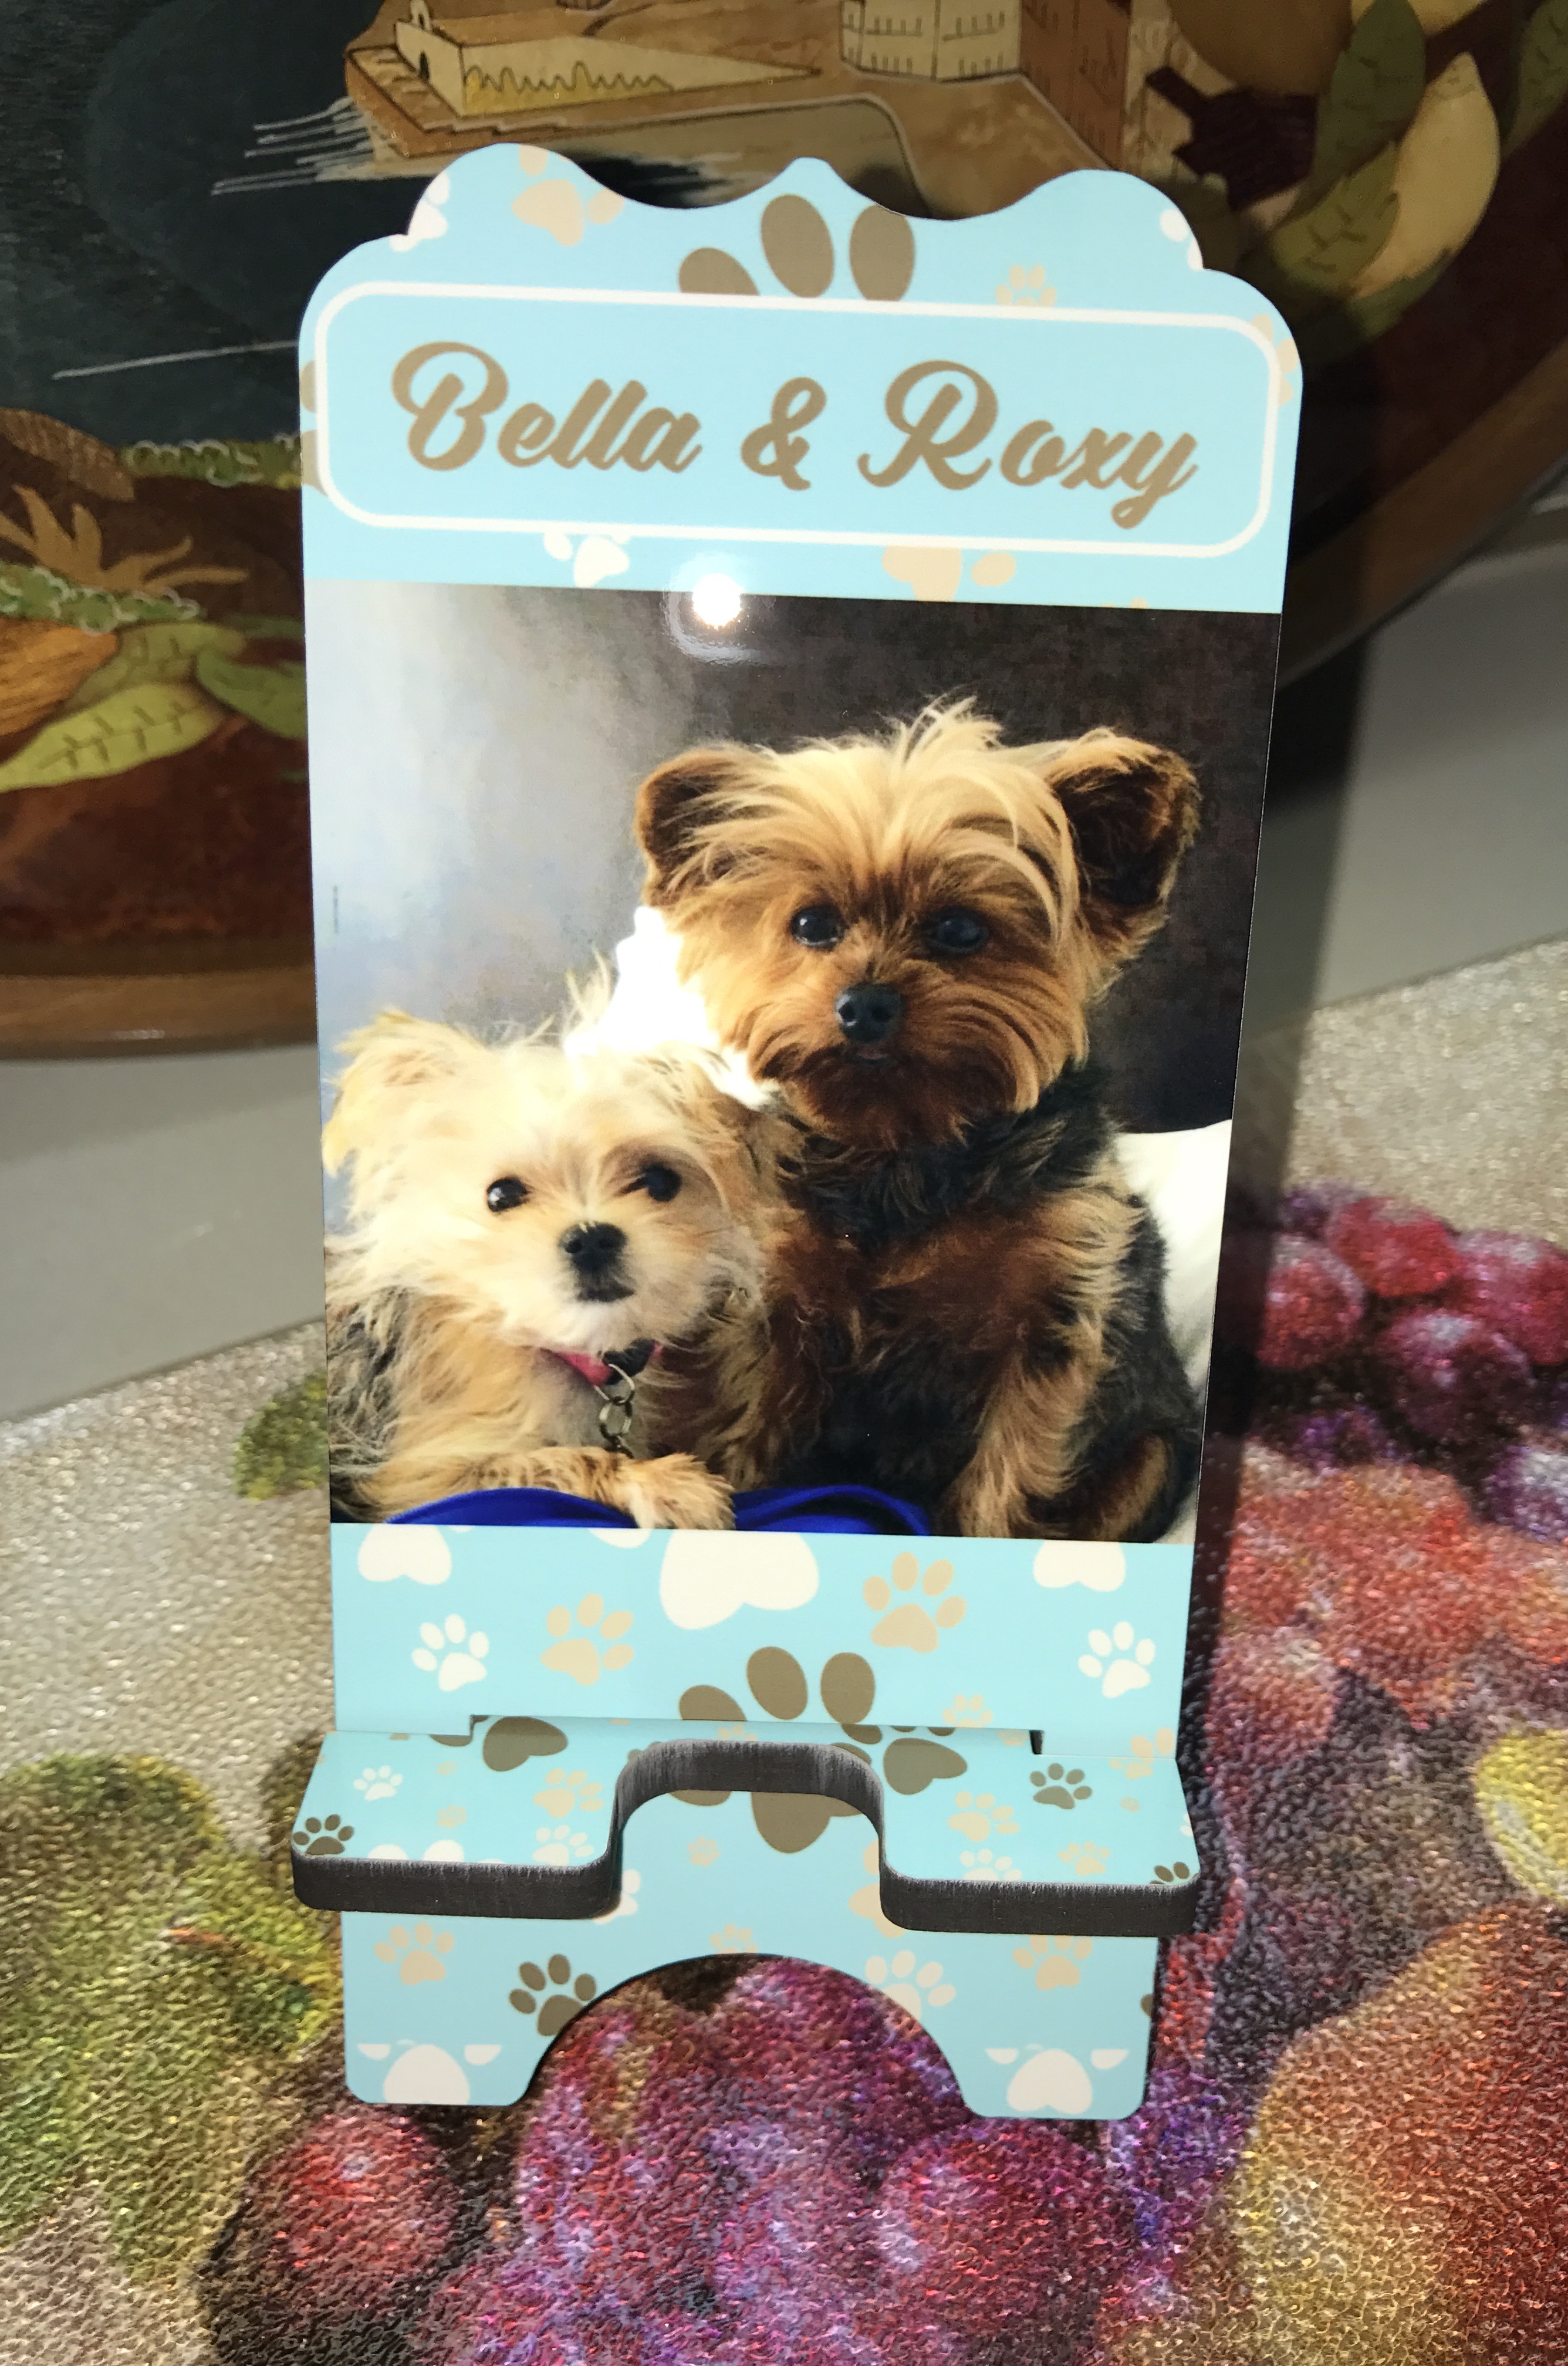 Pet theme phone stand made with sublimation printing